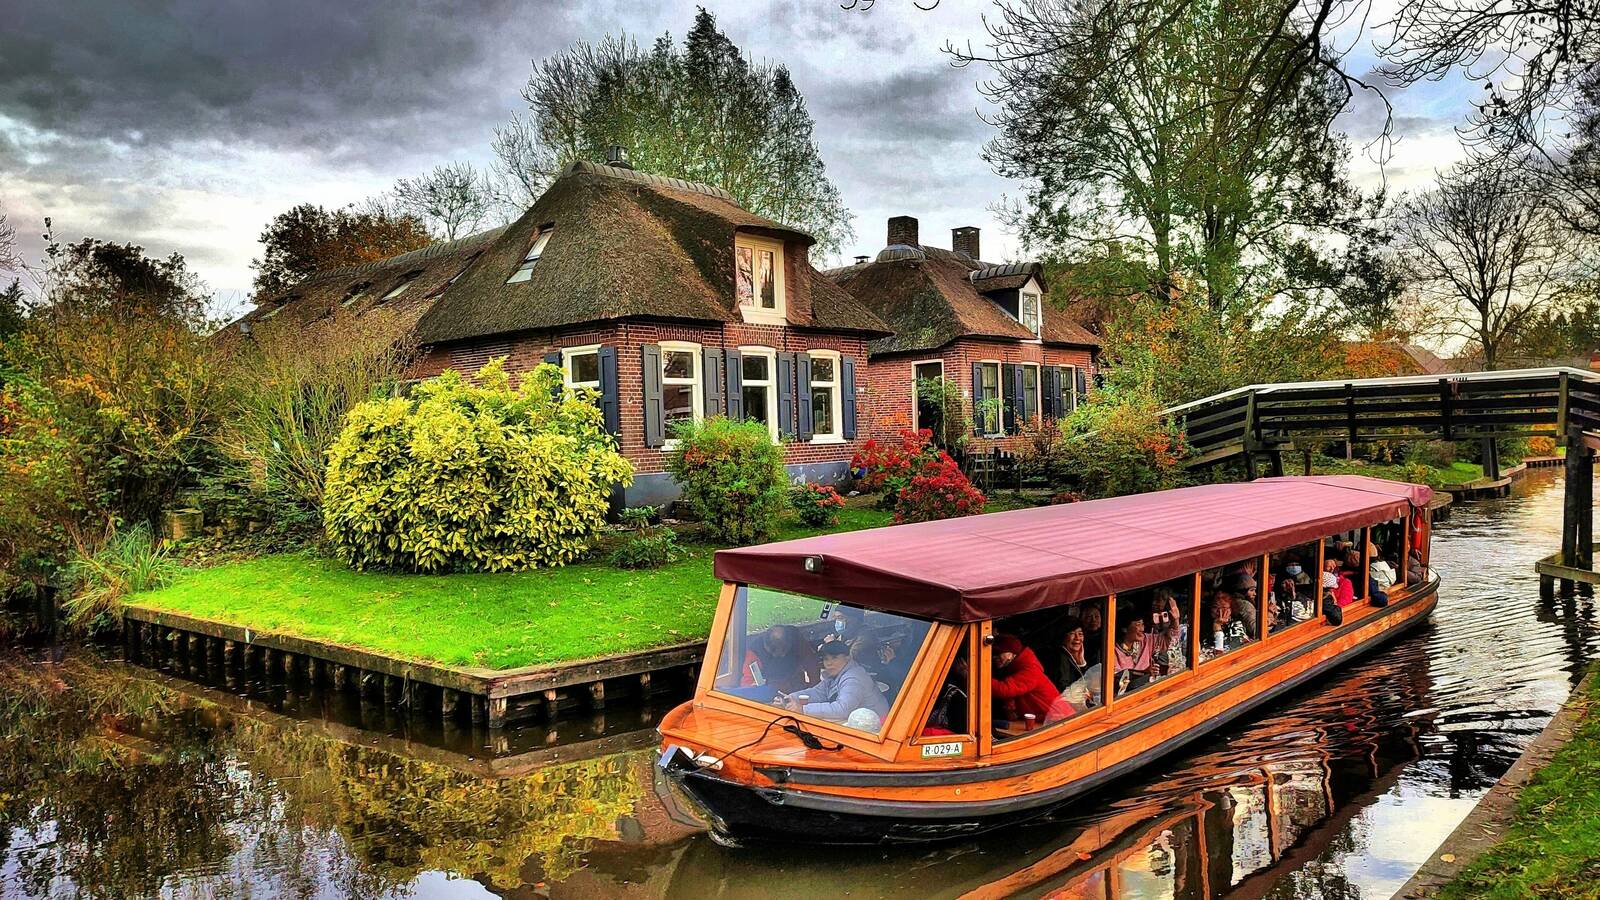 Image of Giethoorn Village by David Lally